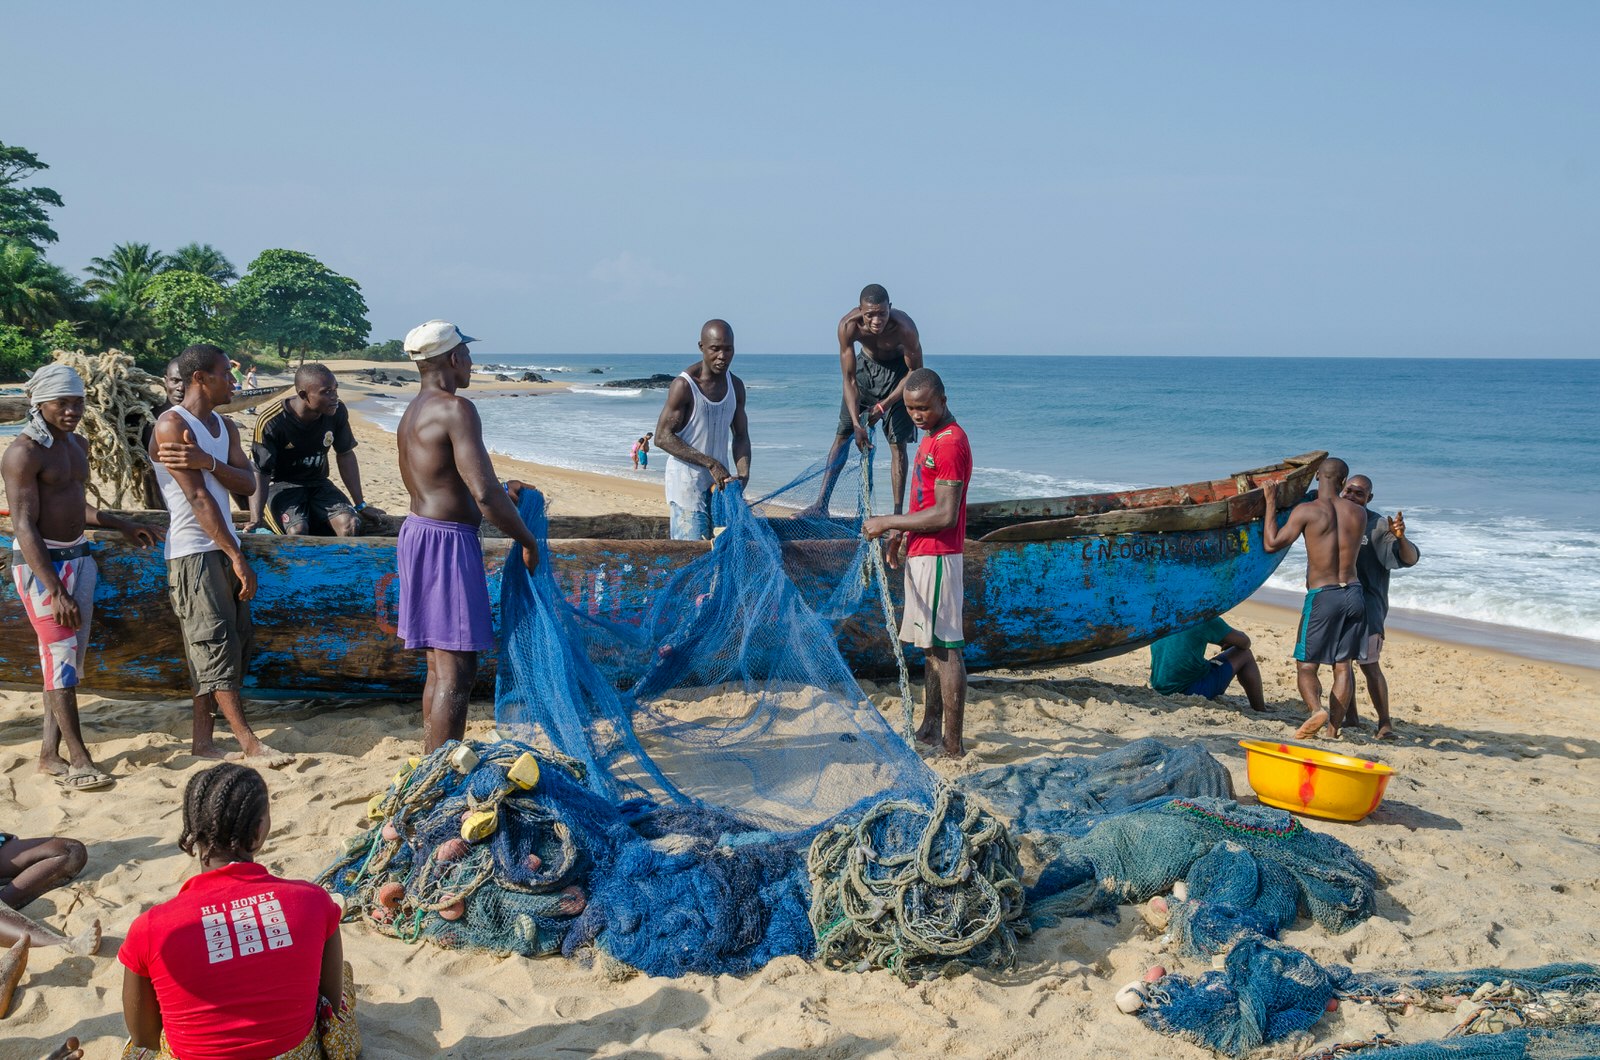 A group of fishers work to load their nets onto their traditional long canoe on the beach